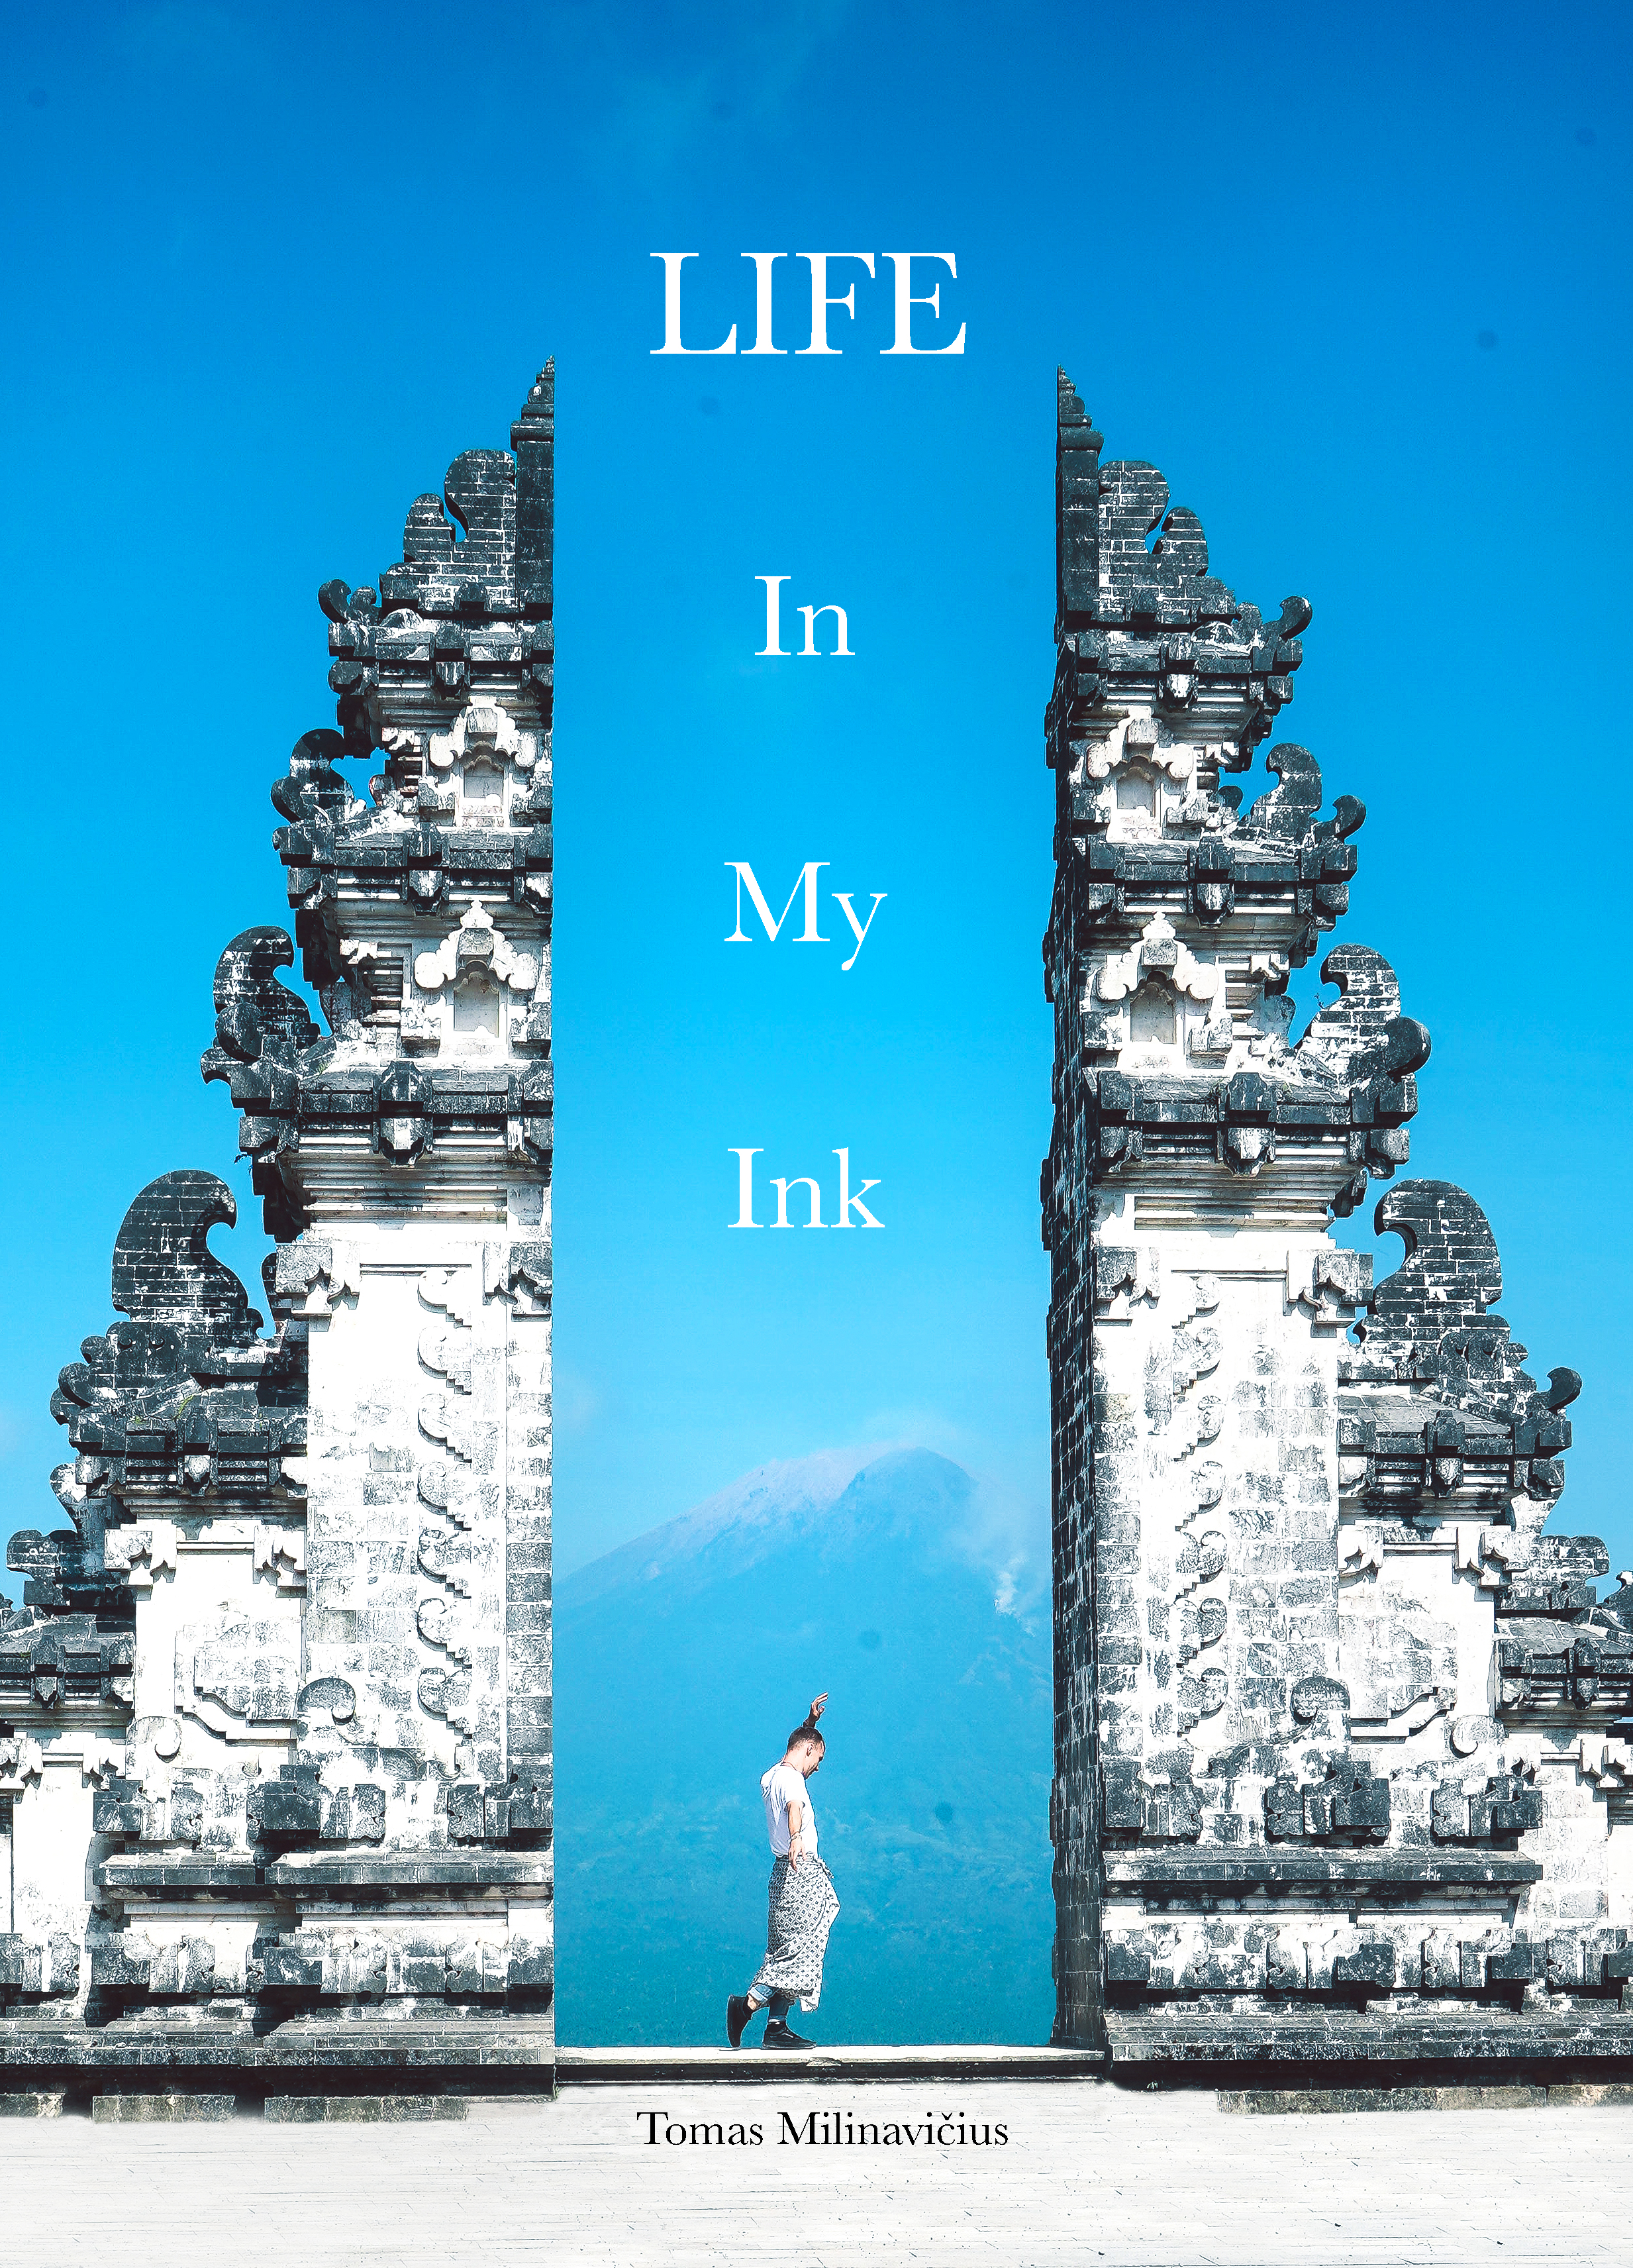 FREE: Life In My Ink by Tomas Milinavicius